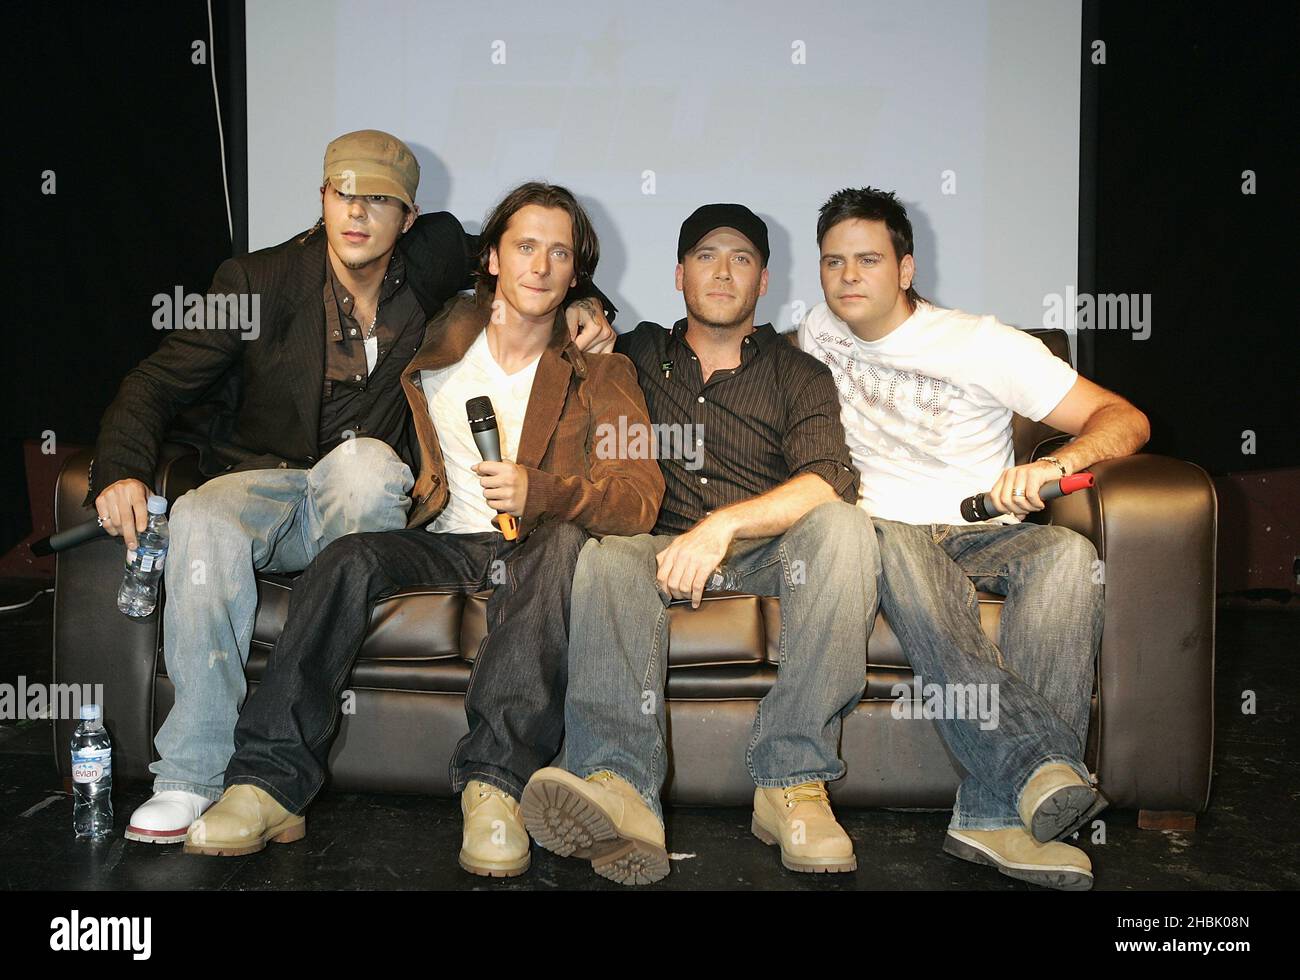 Pop band Five (from left to right) Abs (Richard Breen), Ritchie Neville, J (Jason 'J' Brown) and Scott Robinson - who now comprise four members - during a press conference to announce their reunion, at Bar Academy in Islington, north London. Stock Photo